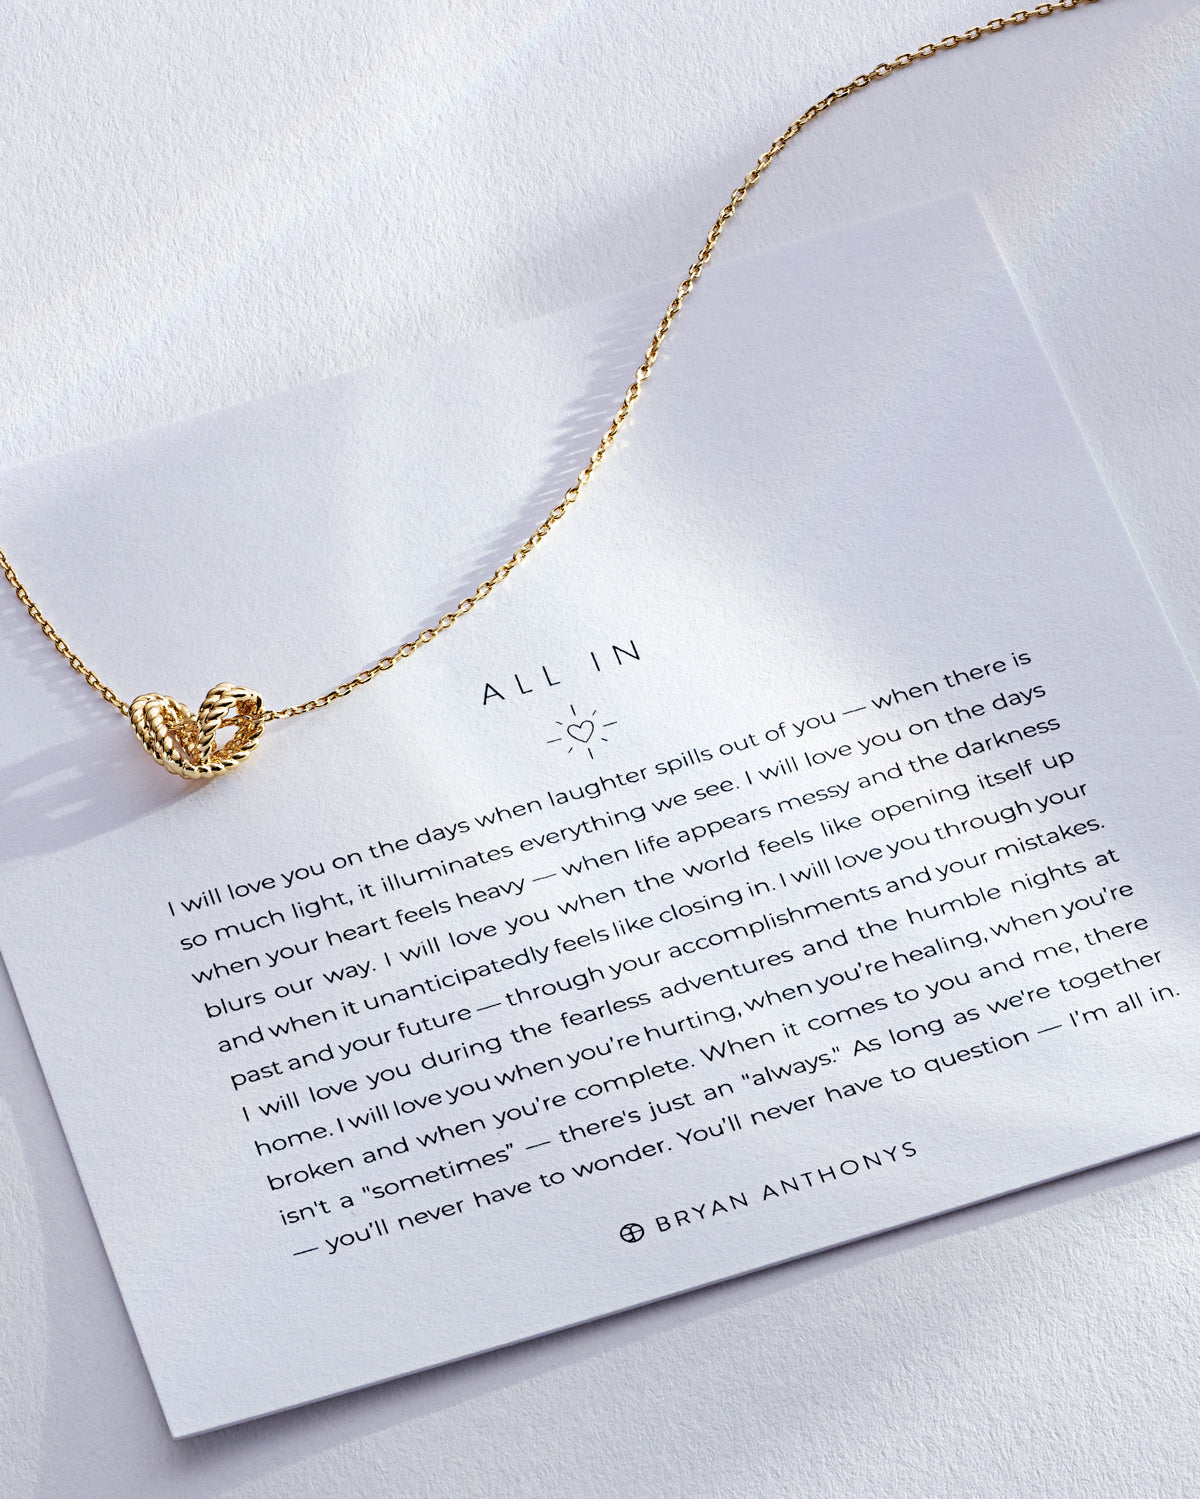 All In Necklace on card in 14k gold finish